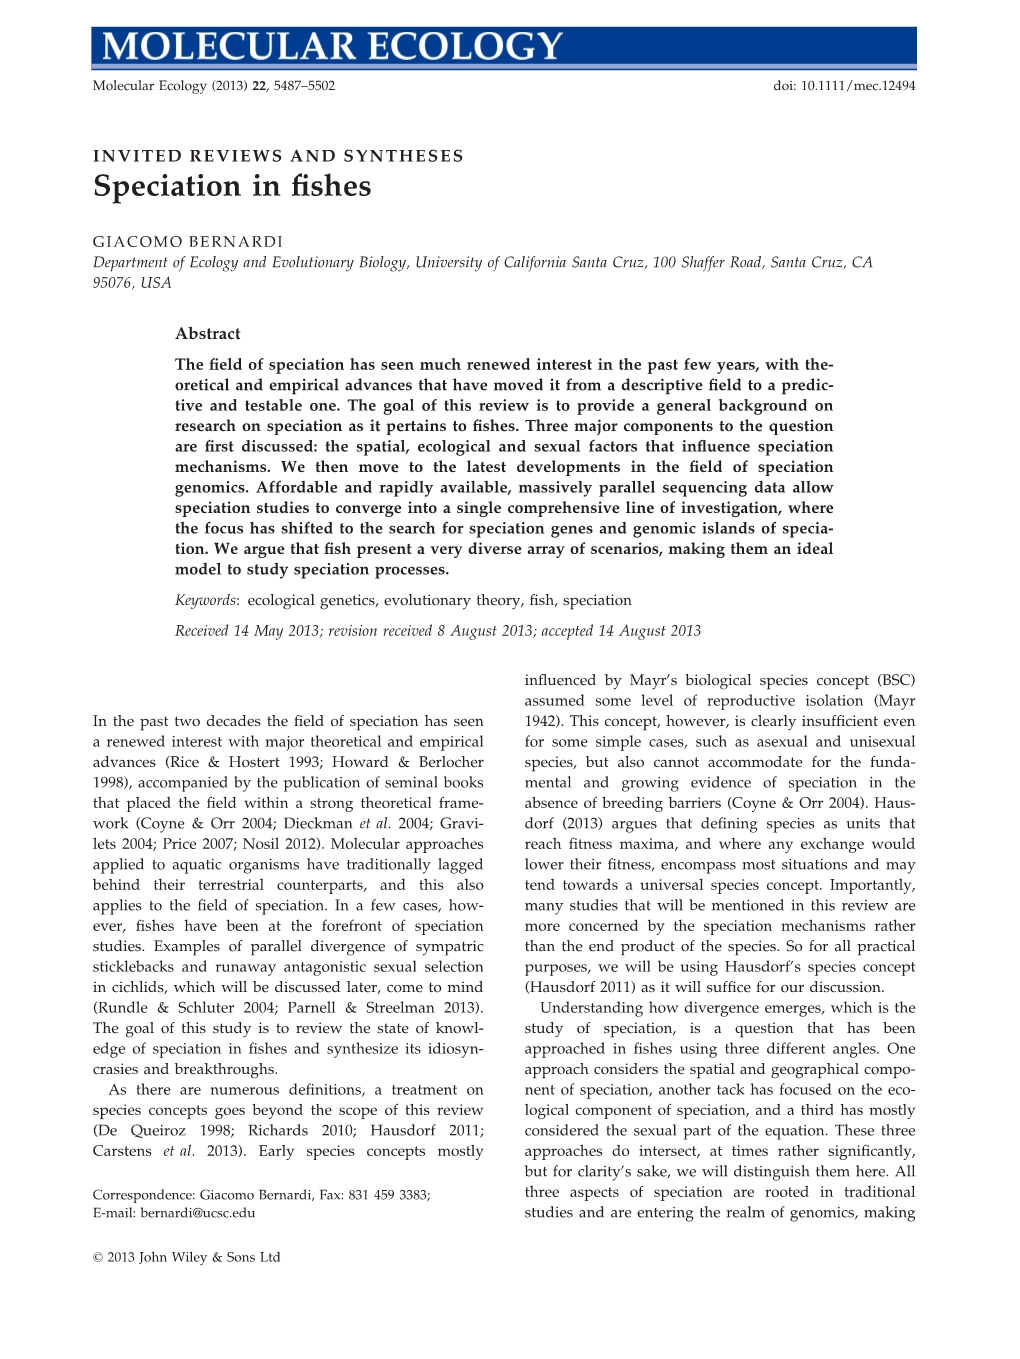 Speciation in Fishes